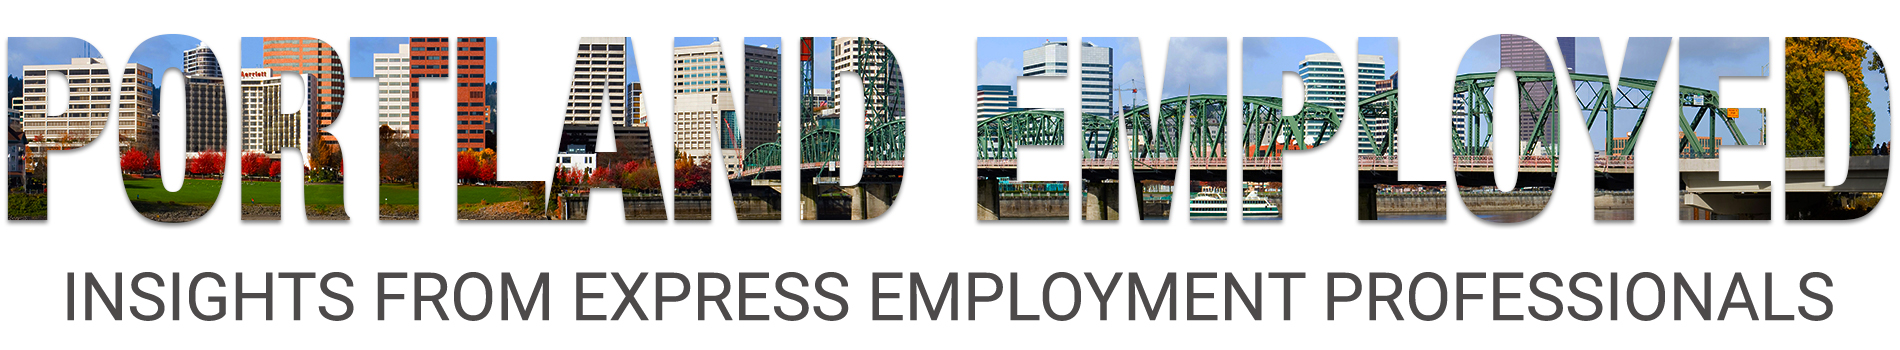 Portland Metro Employed - Insights from Express Employment Professionals